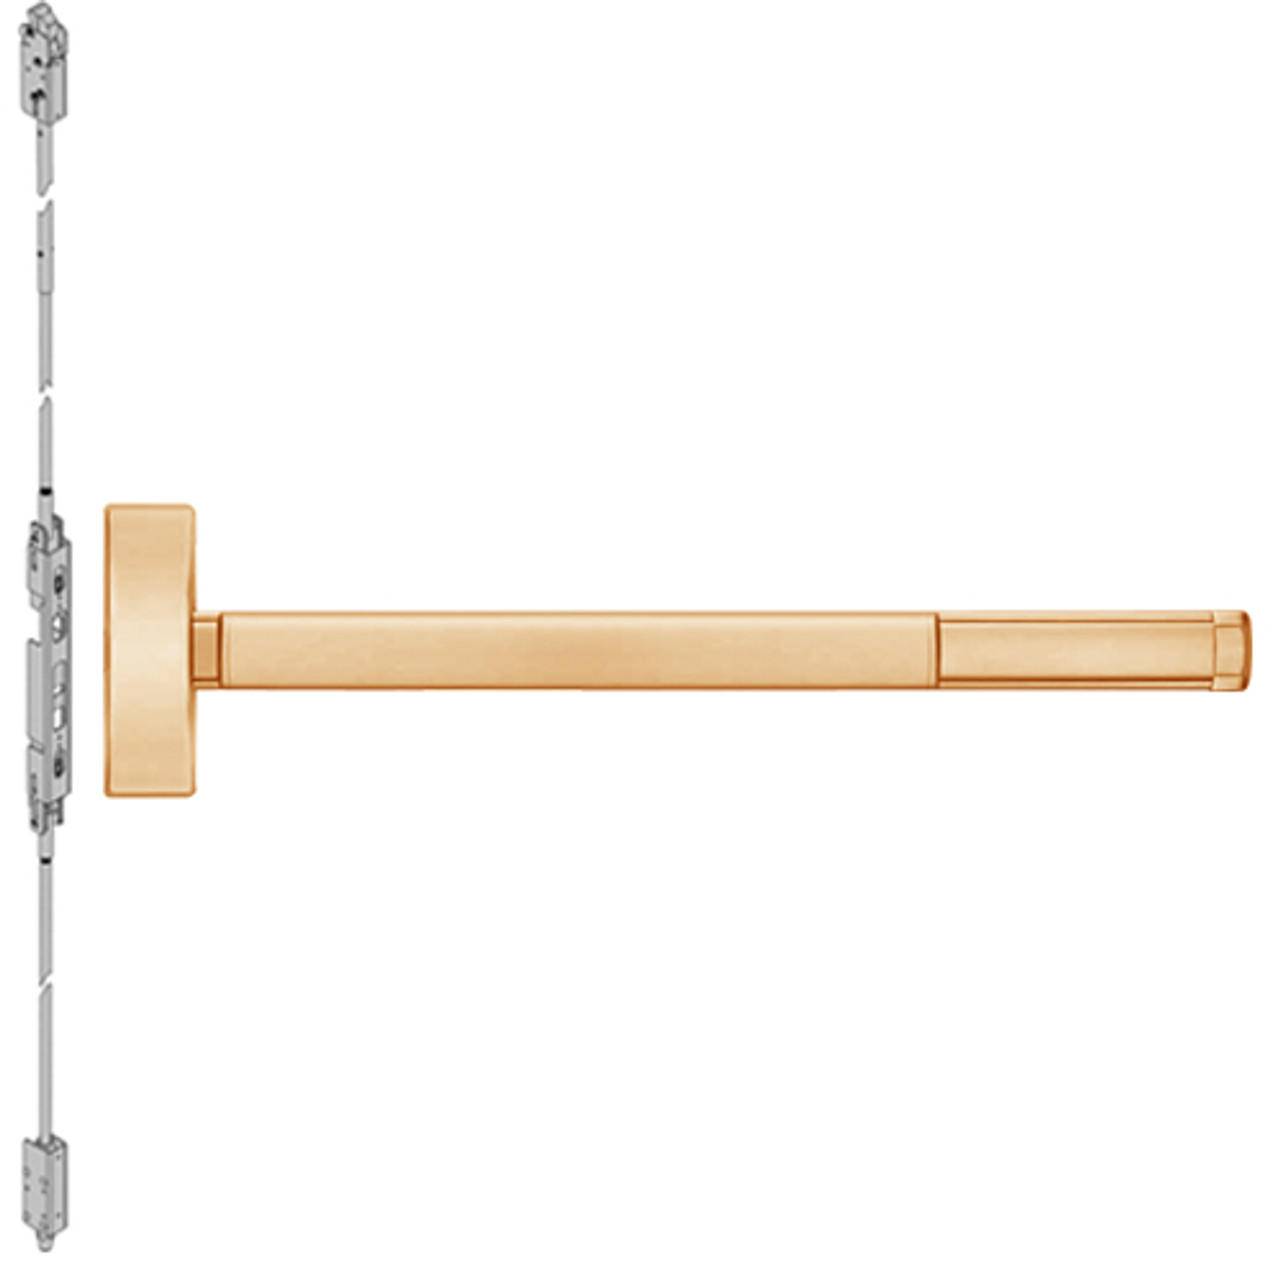 TSFL2814-612-36 PHI 2800 Series Fire Rated Concealed Vertical Rod Exit Device with Touchbar Monitoring Switch Prepped for Lever-Knob Always Active in Satin Bronze Finish